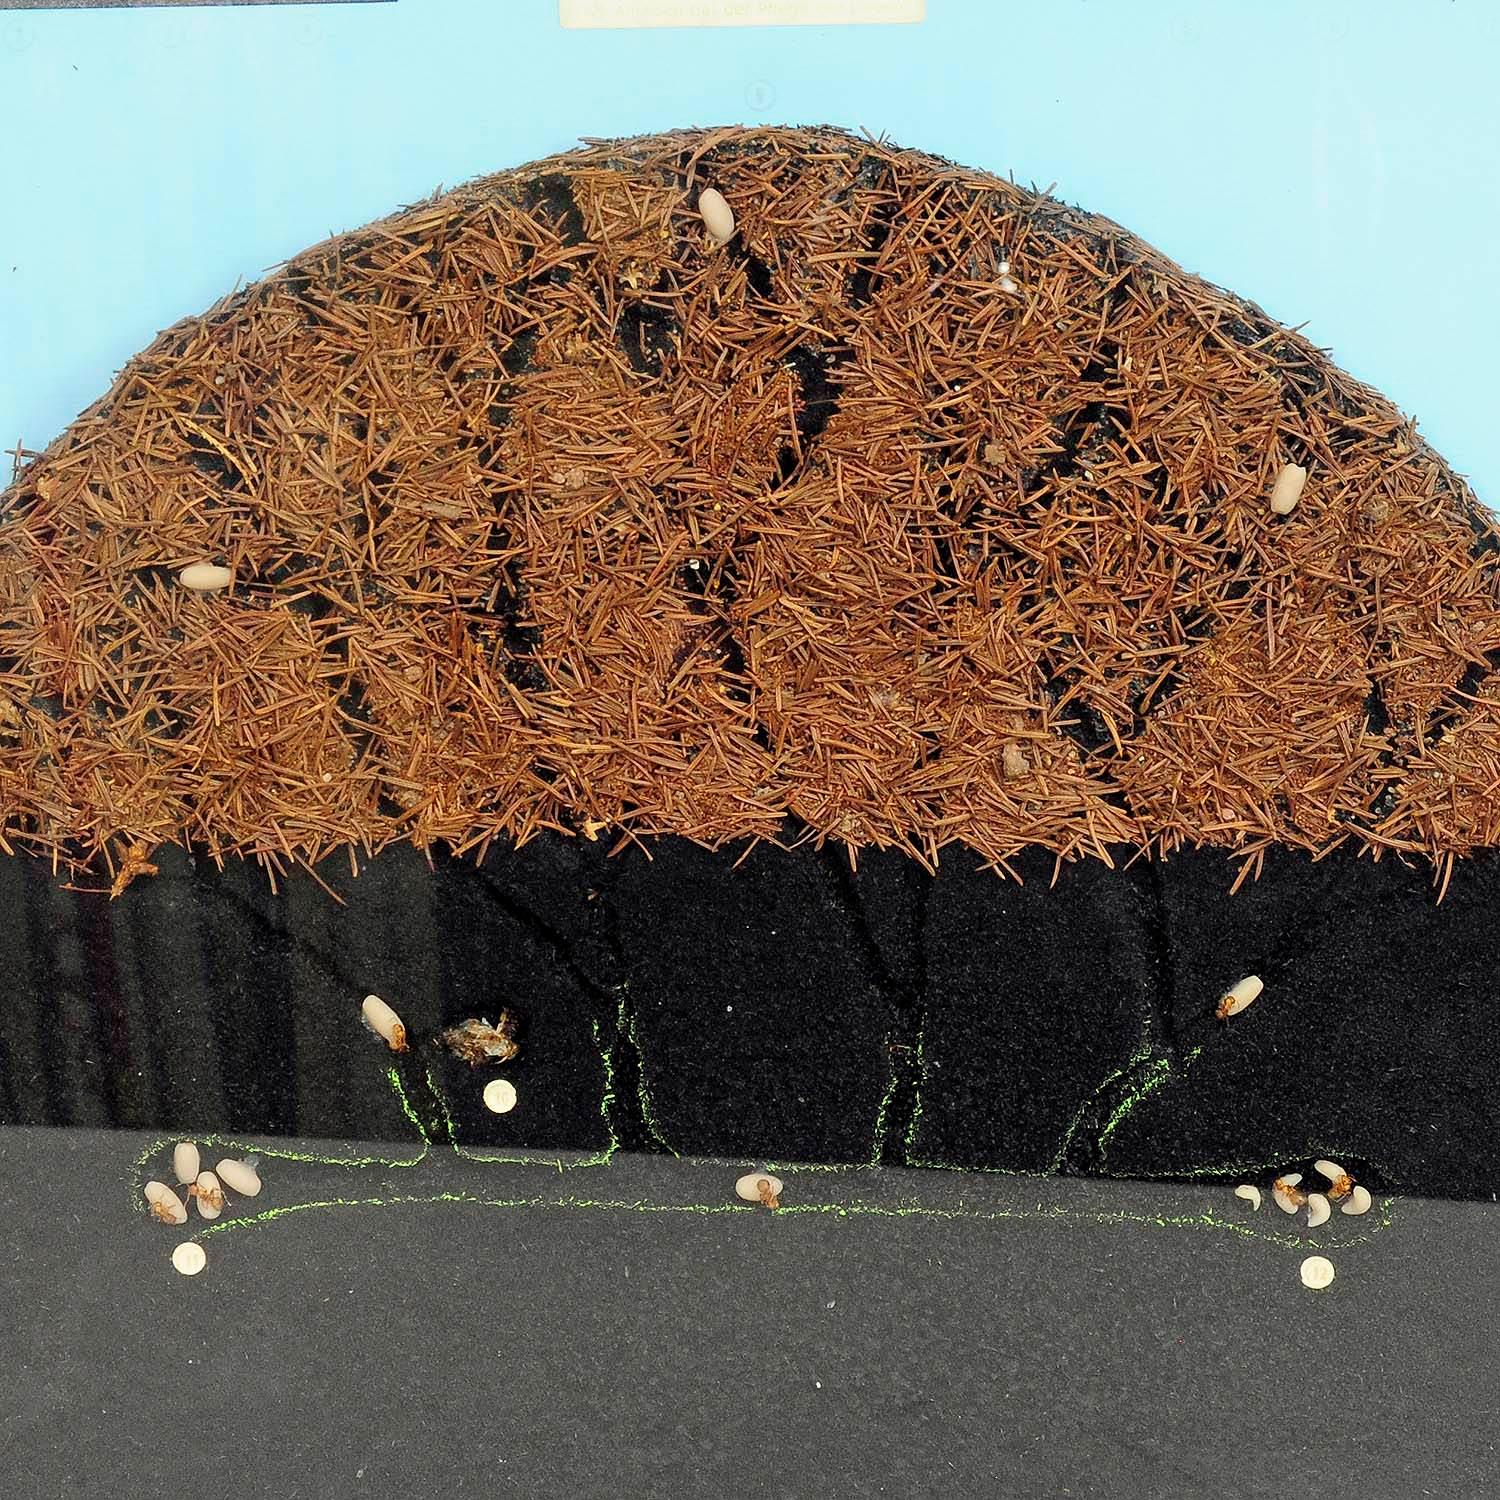 inside an ant hill